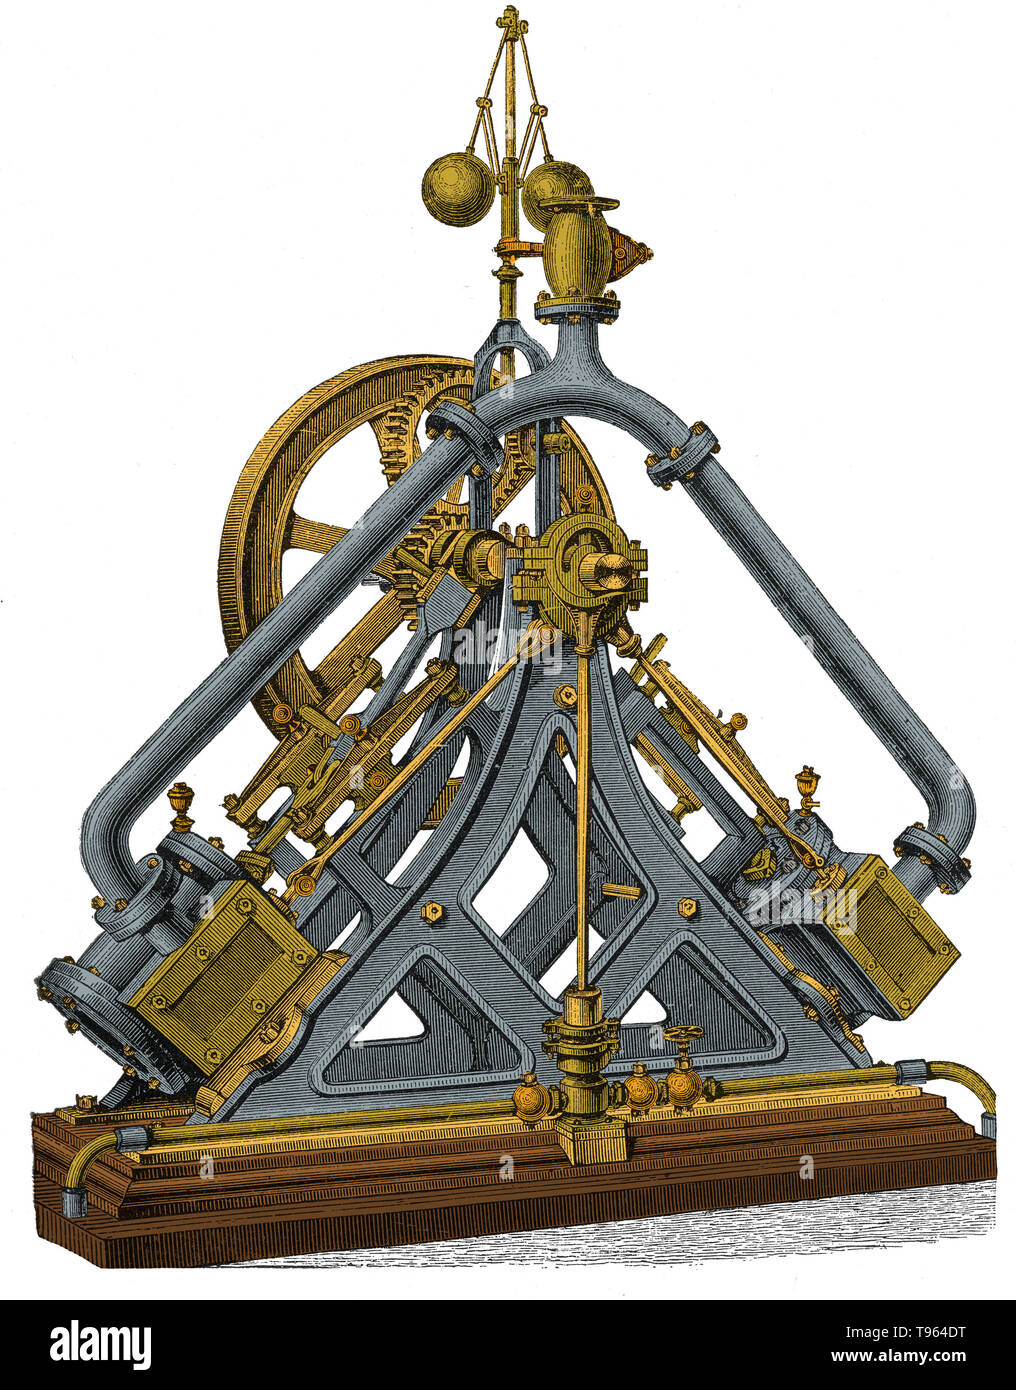 Diagonal steam engines had sloping, upward-pointing cylinders. They were usually used as a means of driving a paddle wheel shaft, while keeping a low center-of-gravity. Some used paired cylinders as Brunel's 'triangle' engine. A few were land based, most were marine. Stock Photo